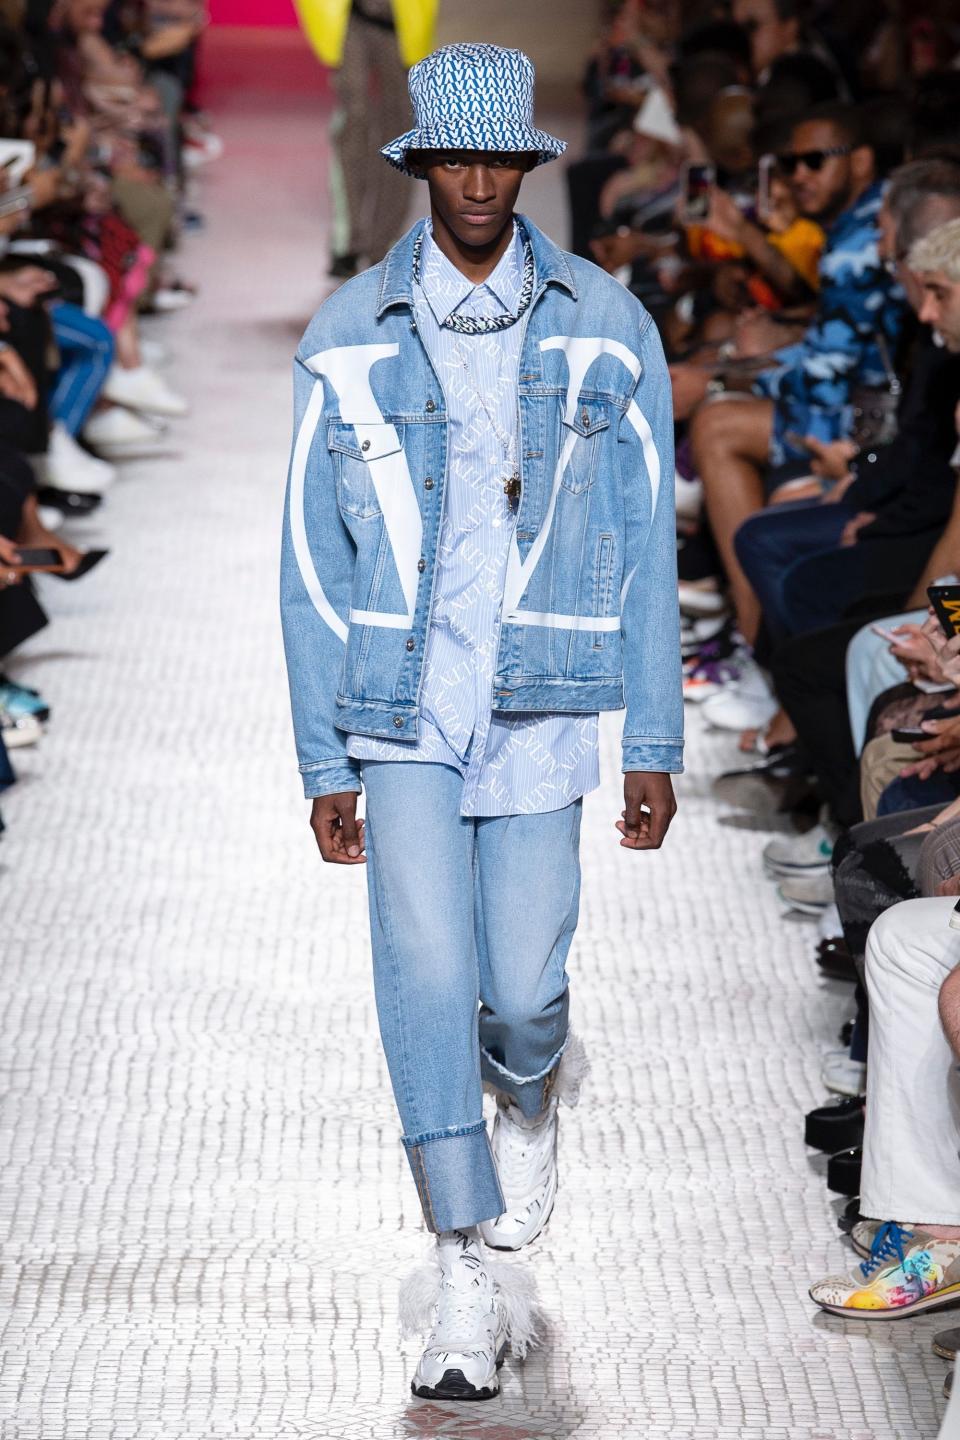 Nowhere is the schism between the highs and the lows of fashion more evident than in menswear. Here are the nine trends, from couture to street, that will dominate the Spring 2019 season.